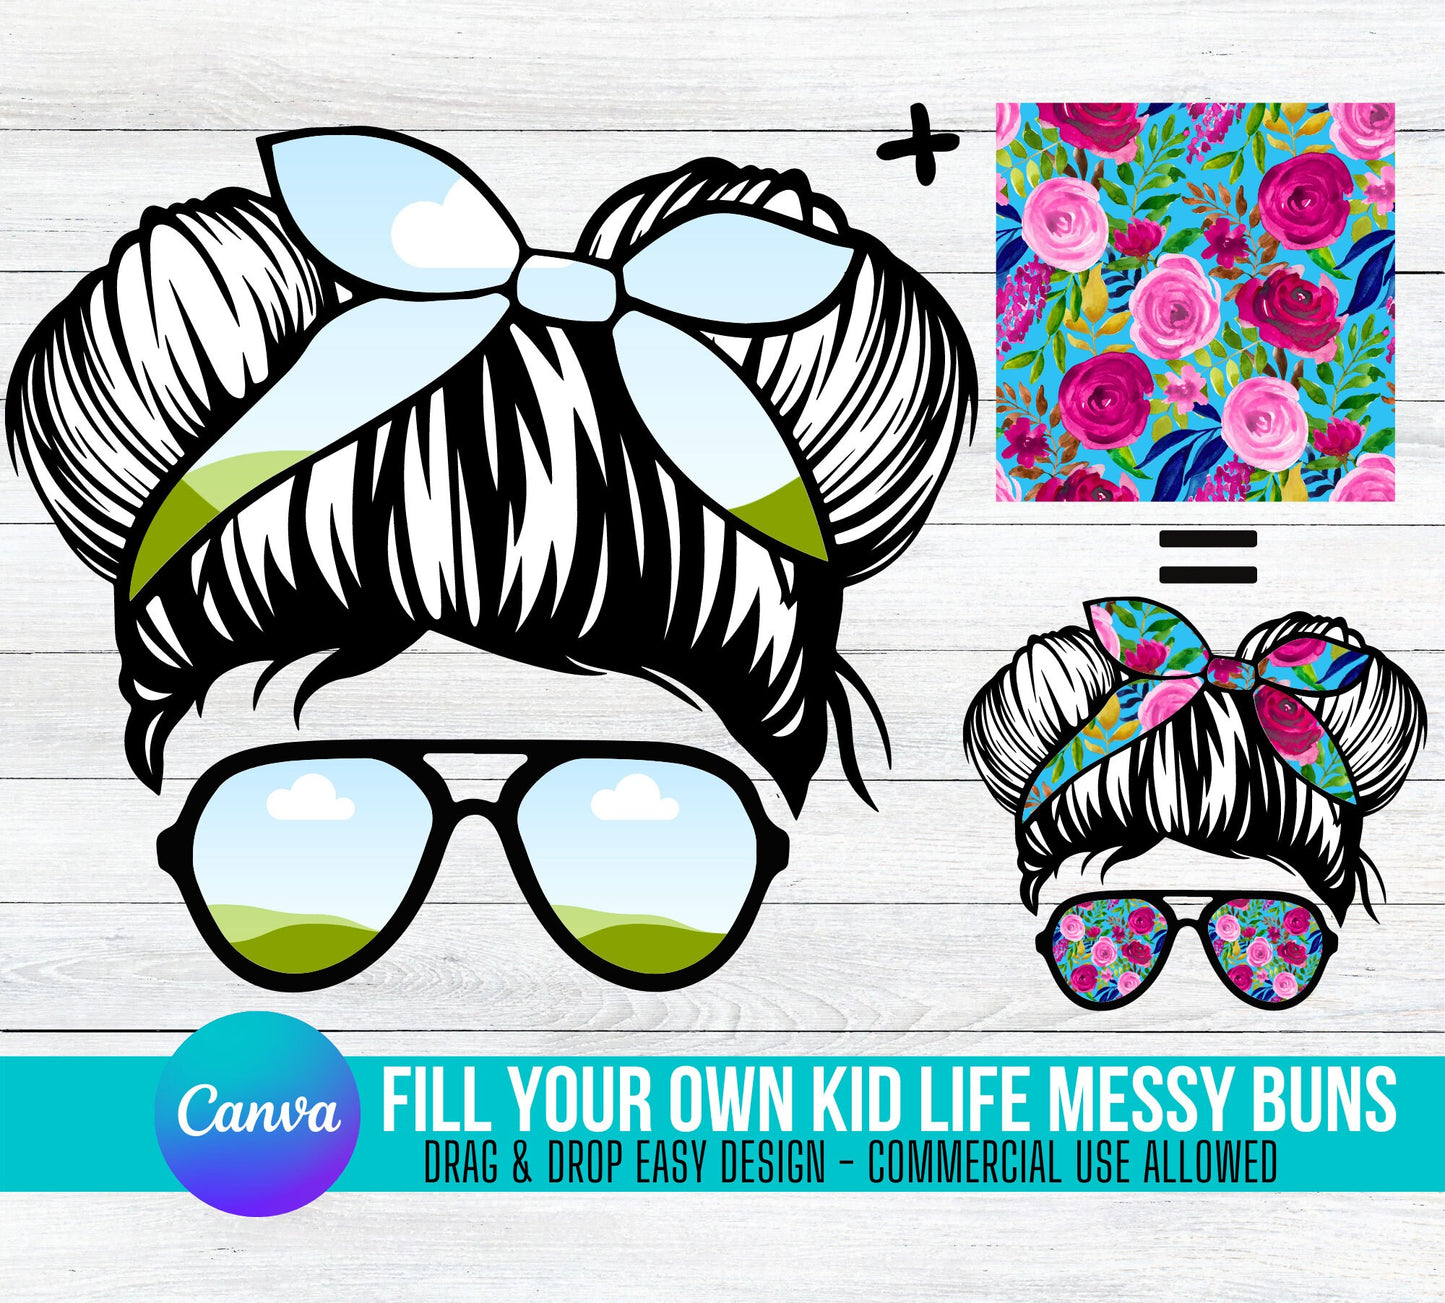 KID LIFE Messy Bun Add Your Own Photos & Background on CANVA Mom Life Messy Bun Drag and Drop Photo Editable Canva Frame Designs